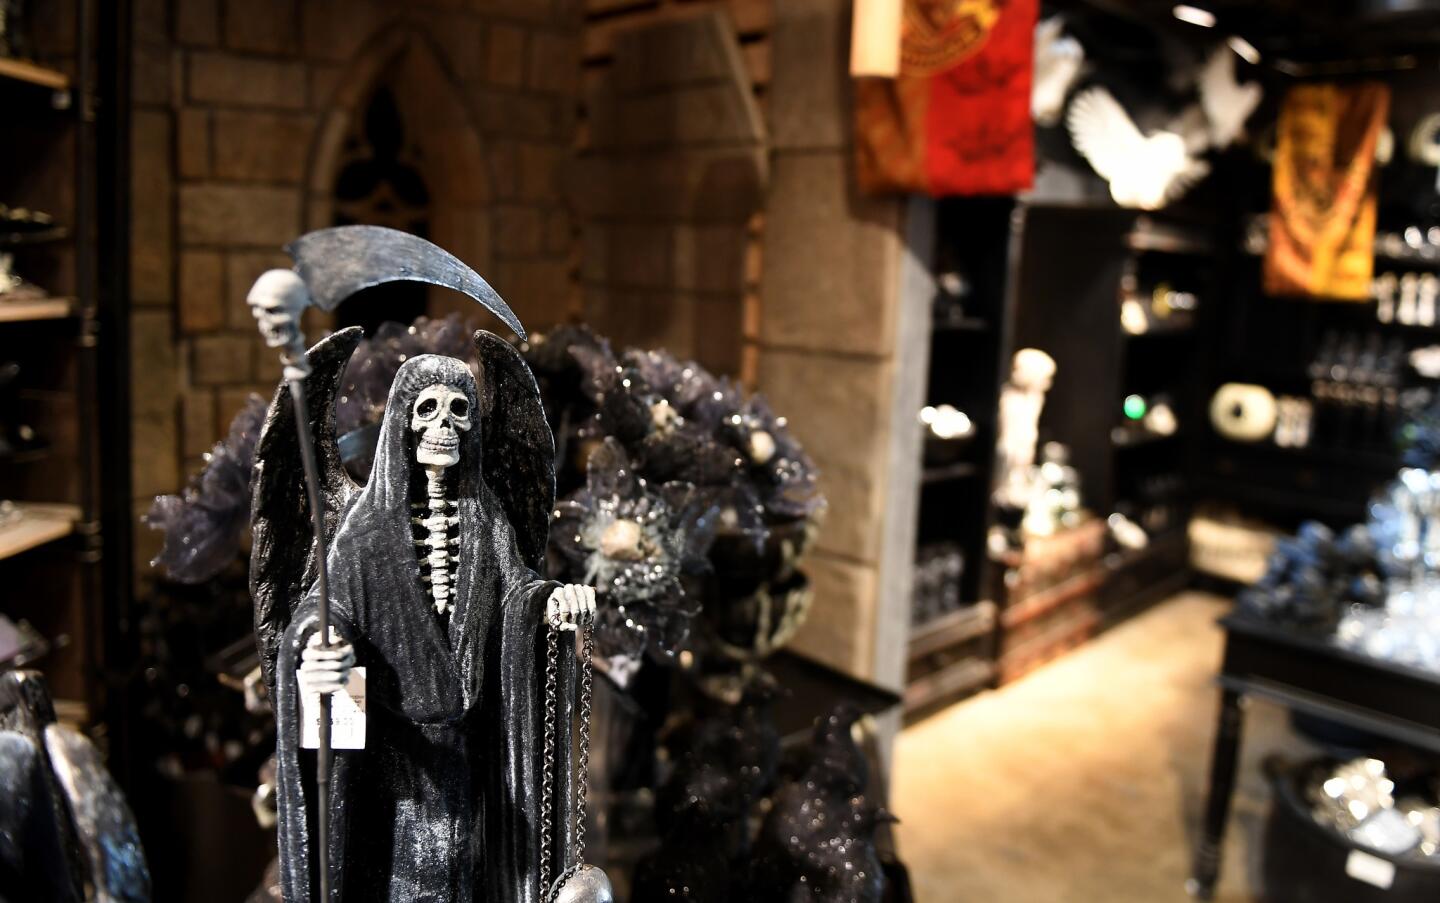 Roger’s Gardens in Corona del Mar casts a spell with its Halloween boutique